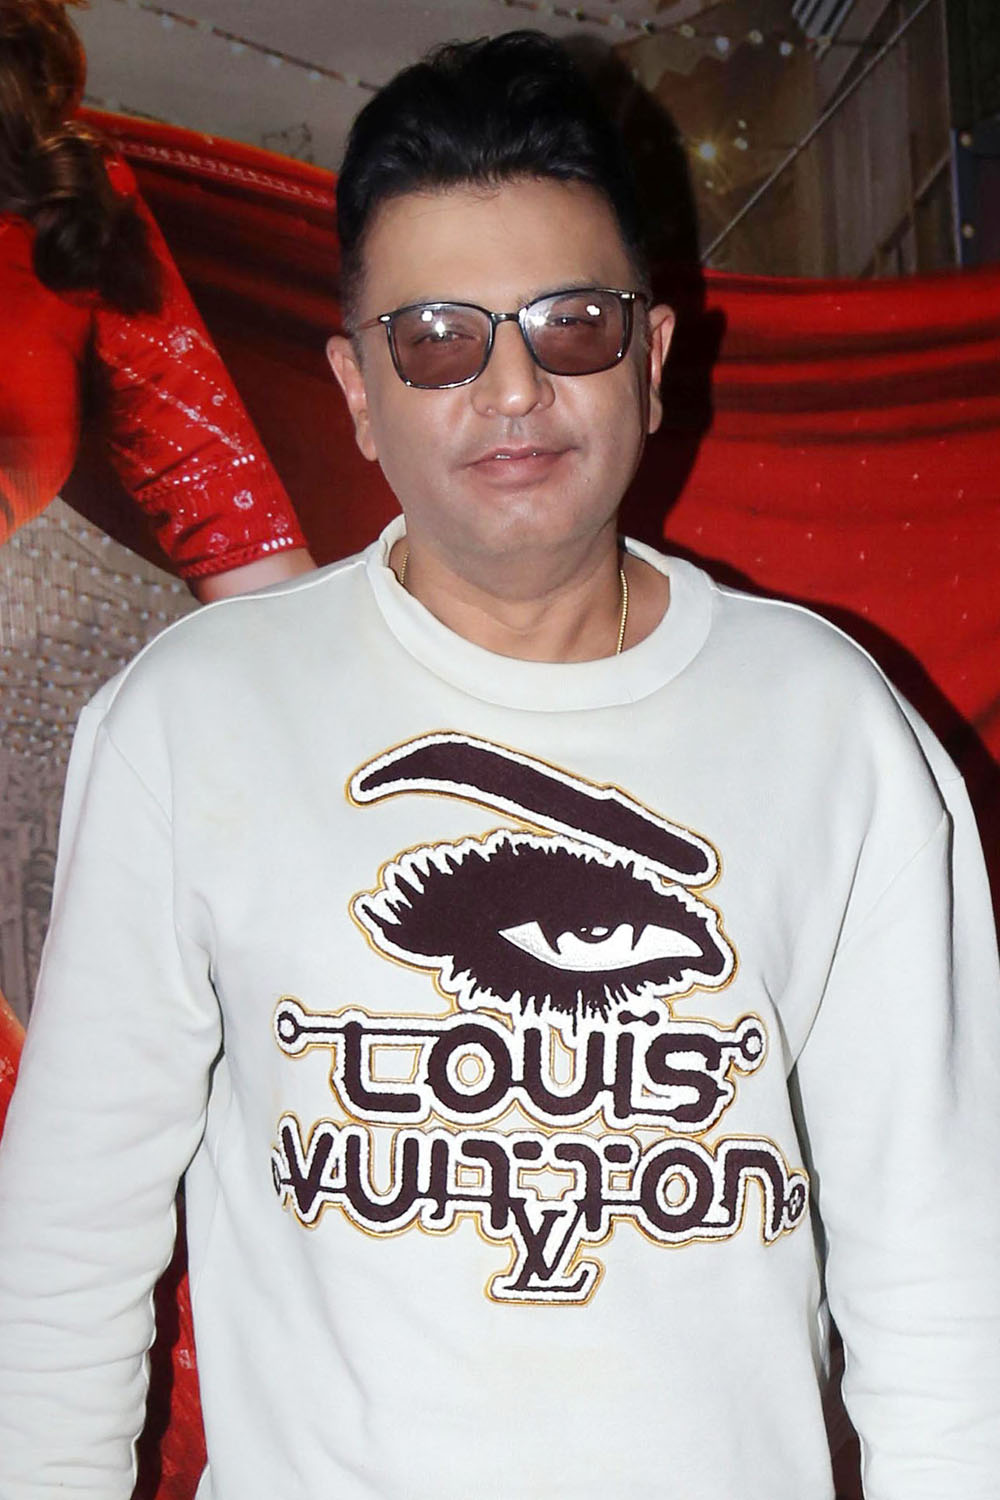 Bhushan Kumar attends Dream Girl 2 Success Party on 6th Sept 2023